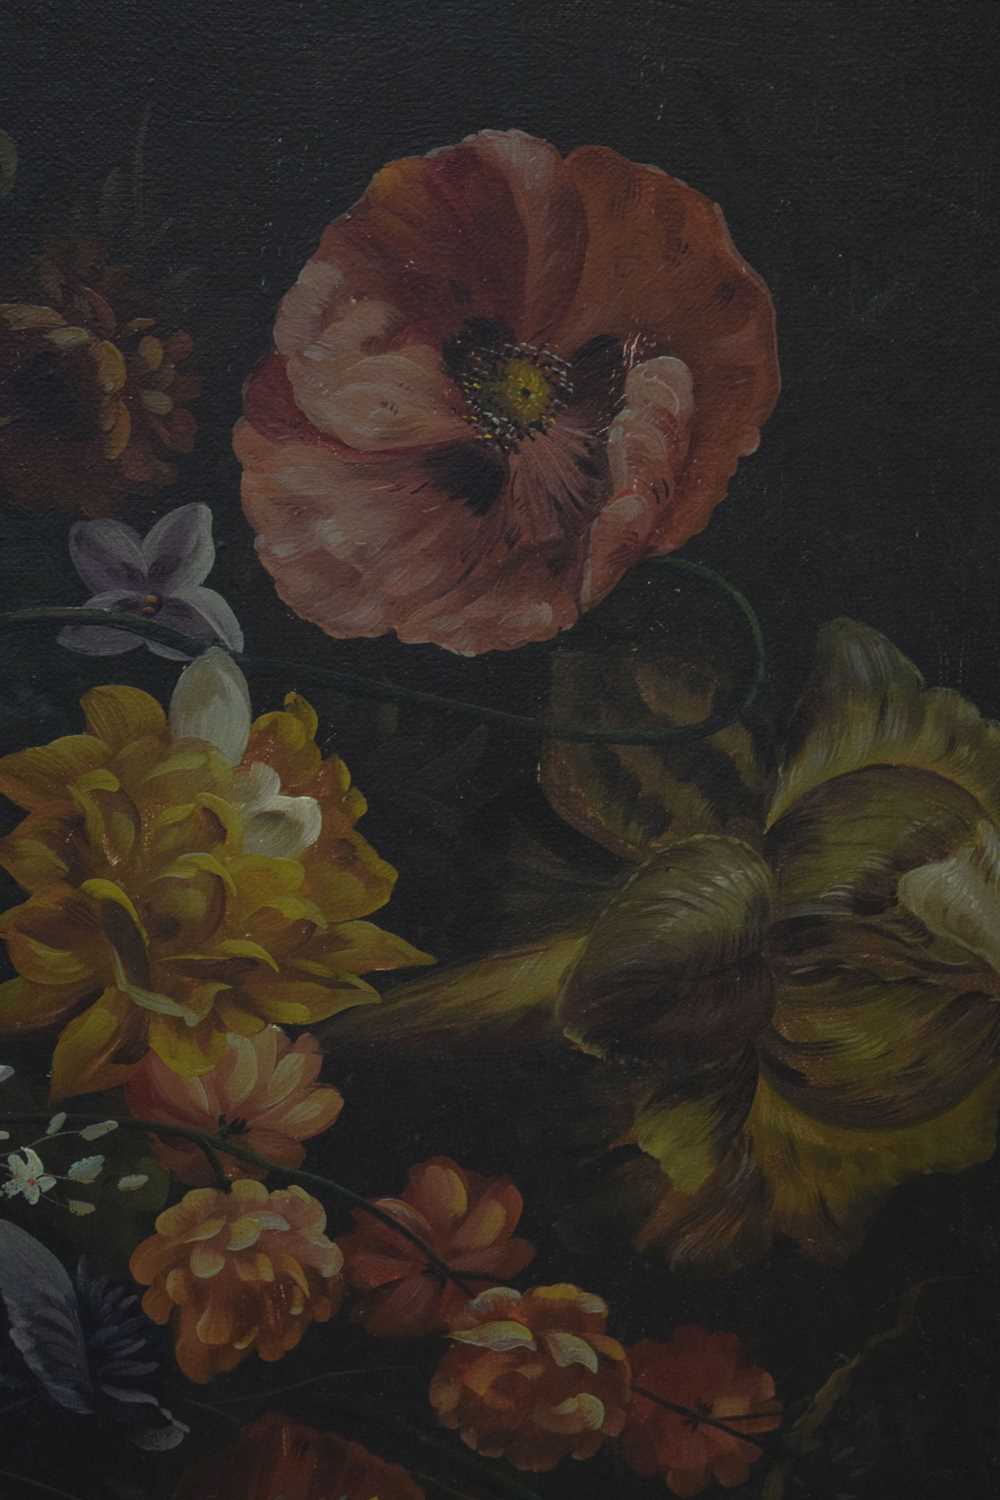 20th century Continental School - Still life with flowers, in 17th century taste - Image 7 of 10